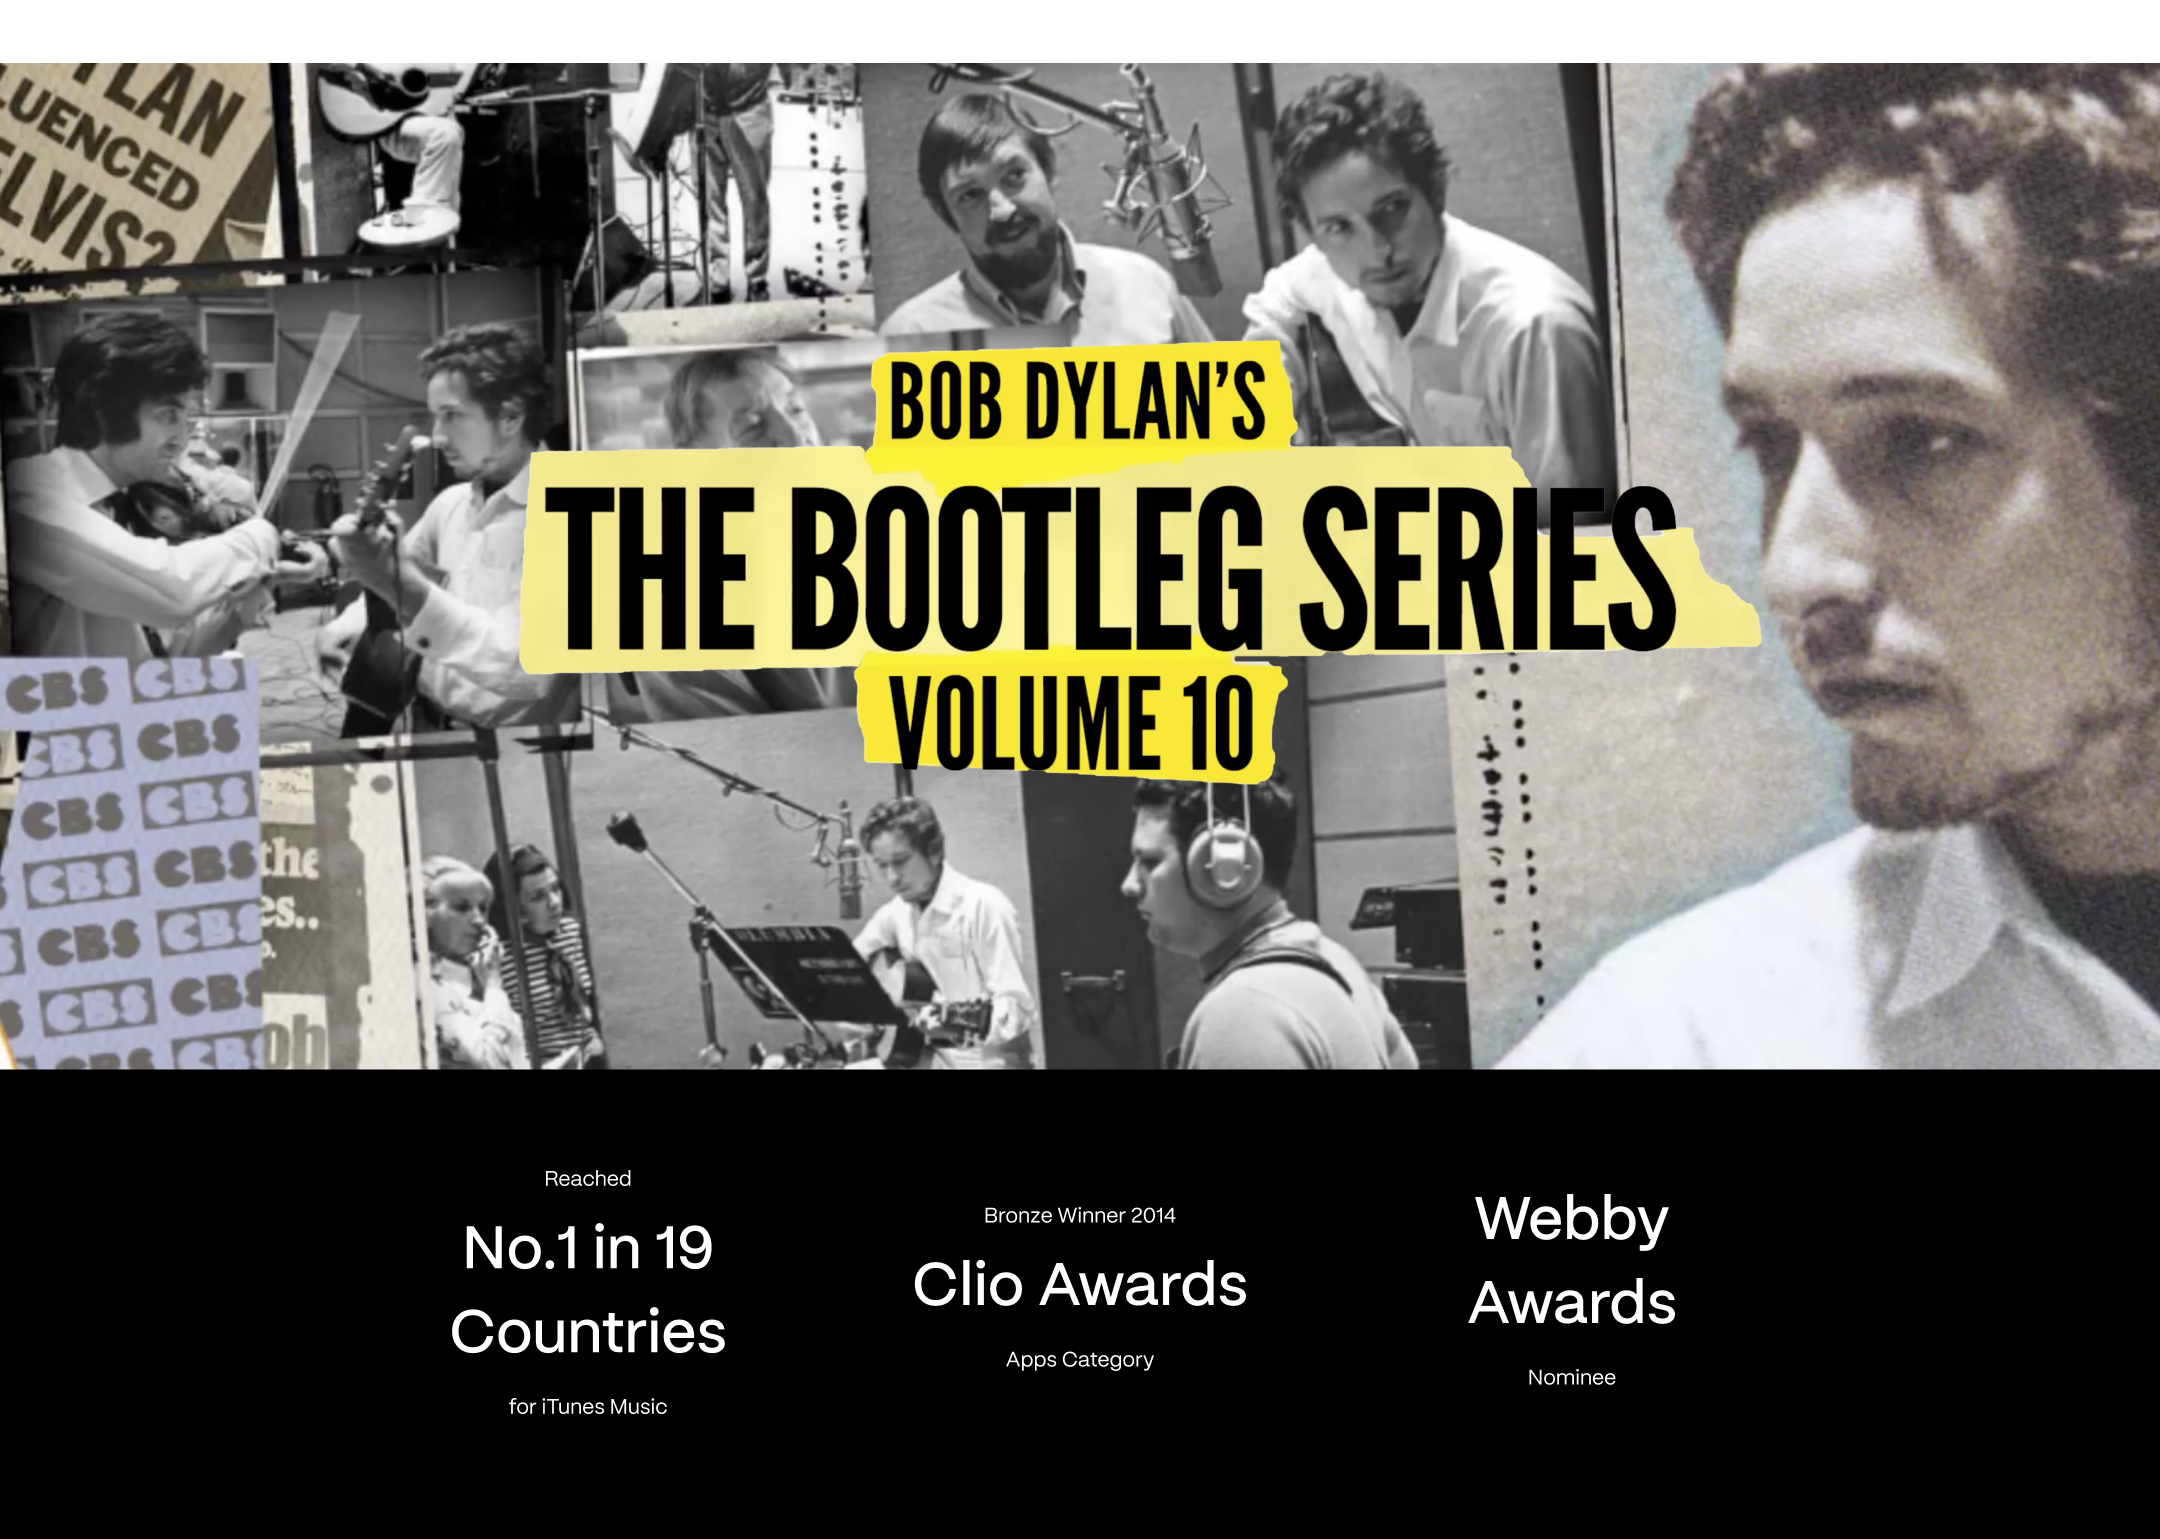 Award-winning music app for one of the greatest songwriters of all time, Bob Dylan hero image